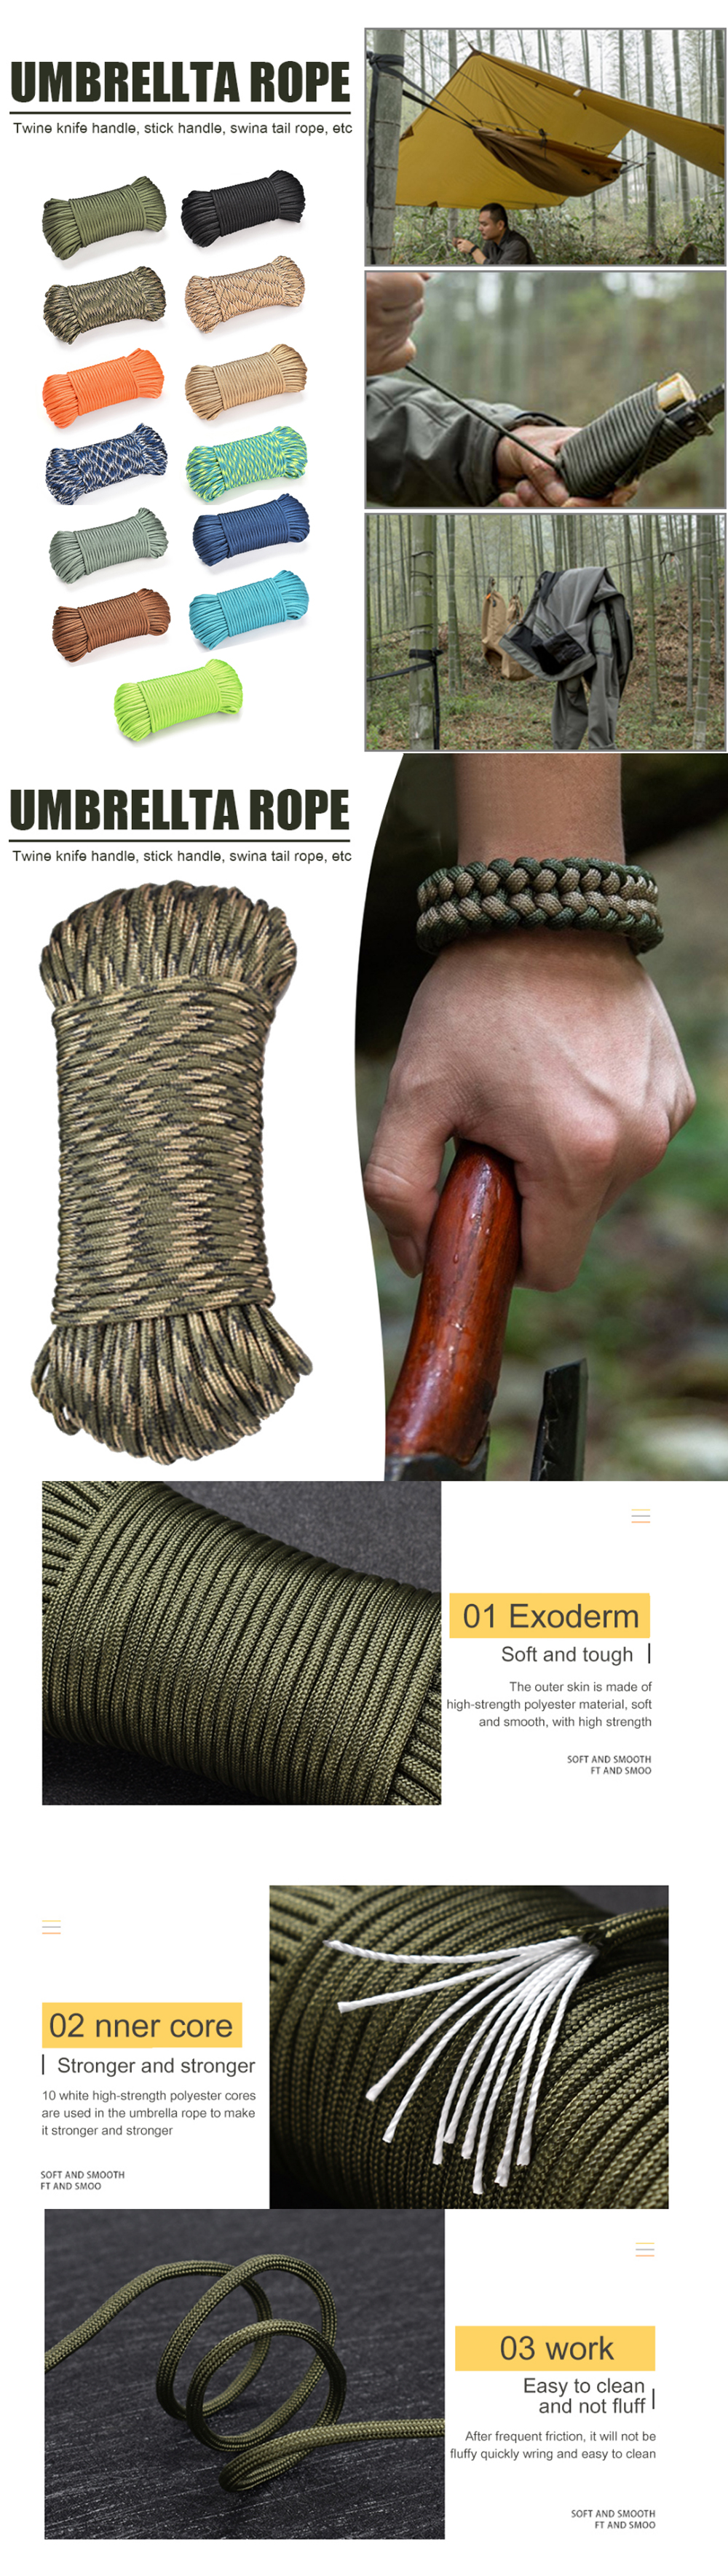 31MRoll-Multifunctional-10-Strand-Cores-Paracord-Dia4mm-Outdoor-Camping-Hiking-Climbing-Survival-Par-1762590-1